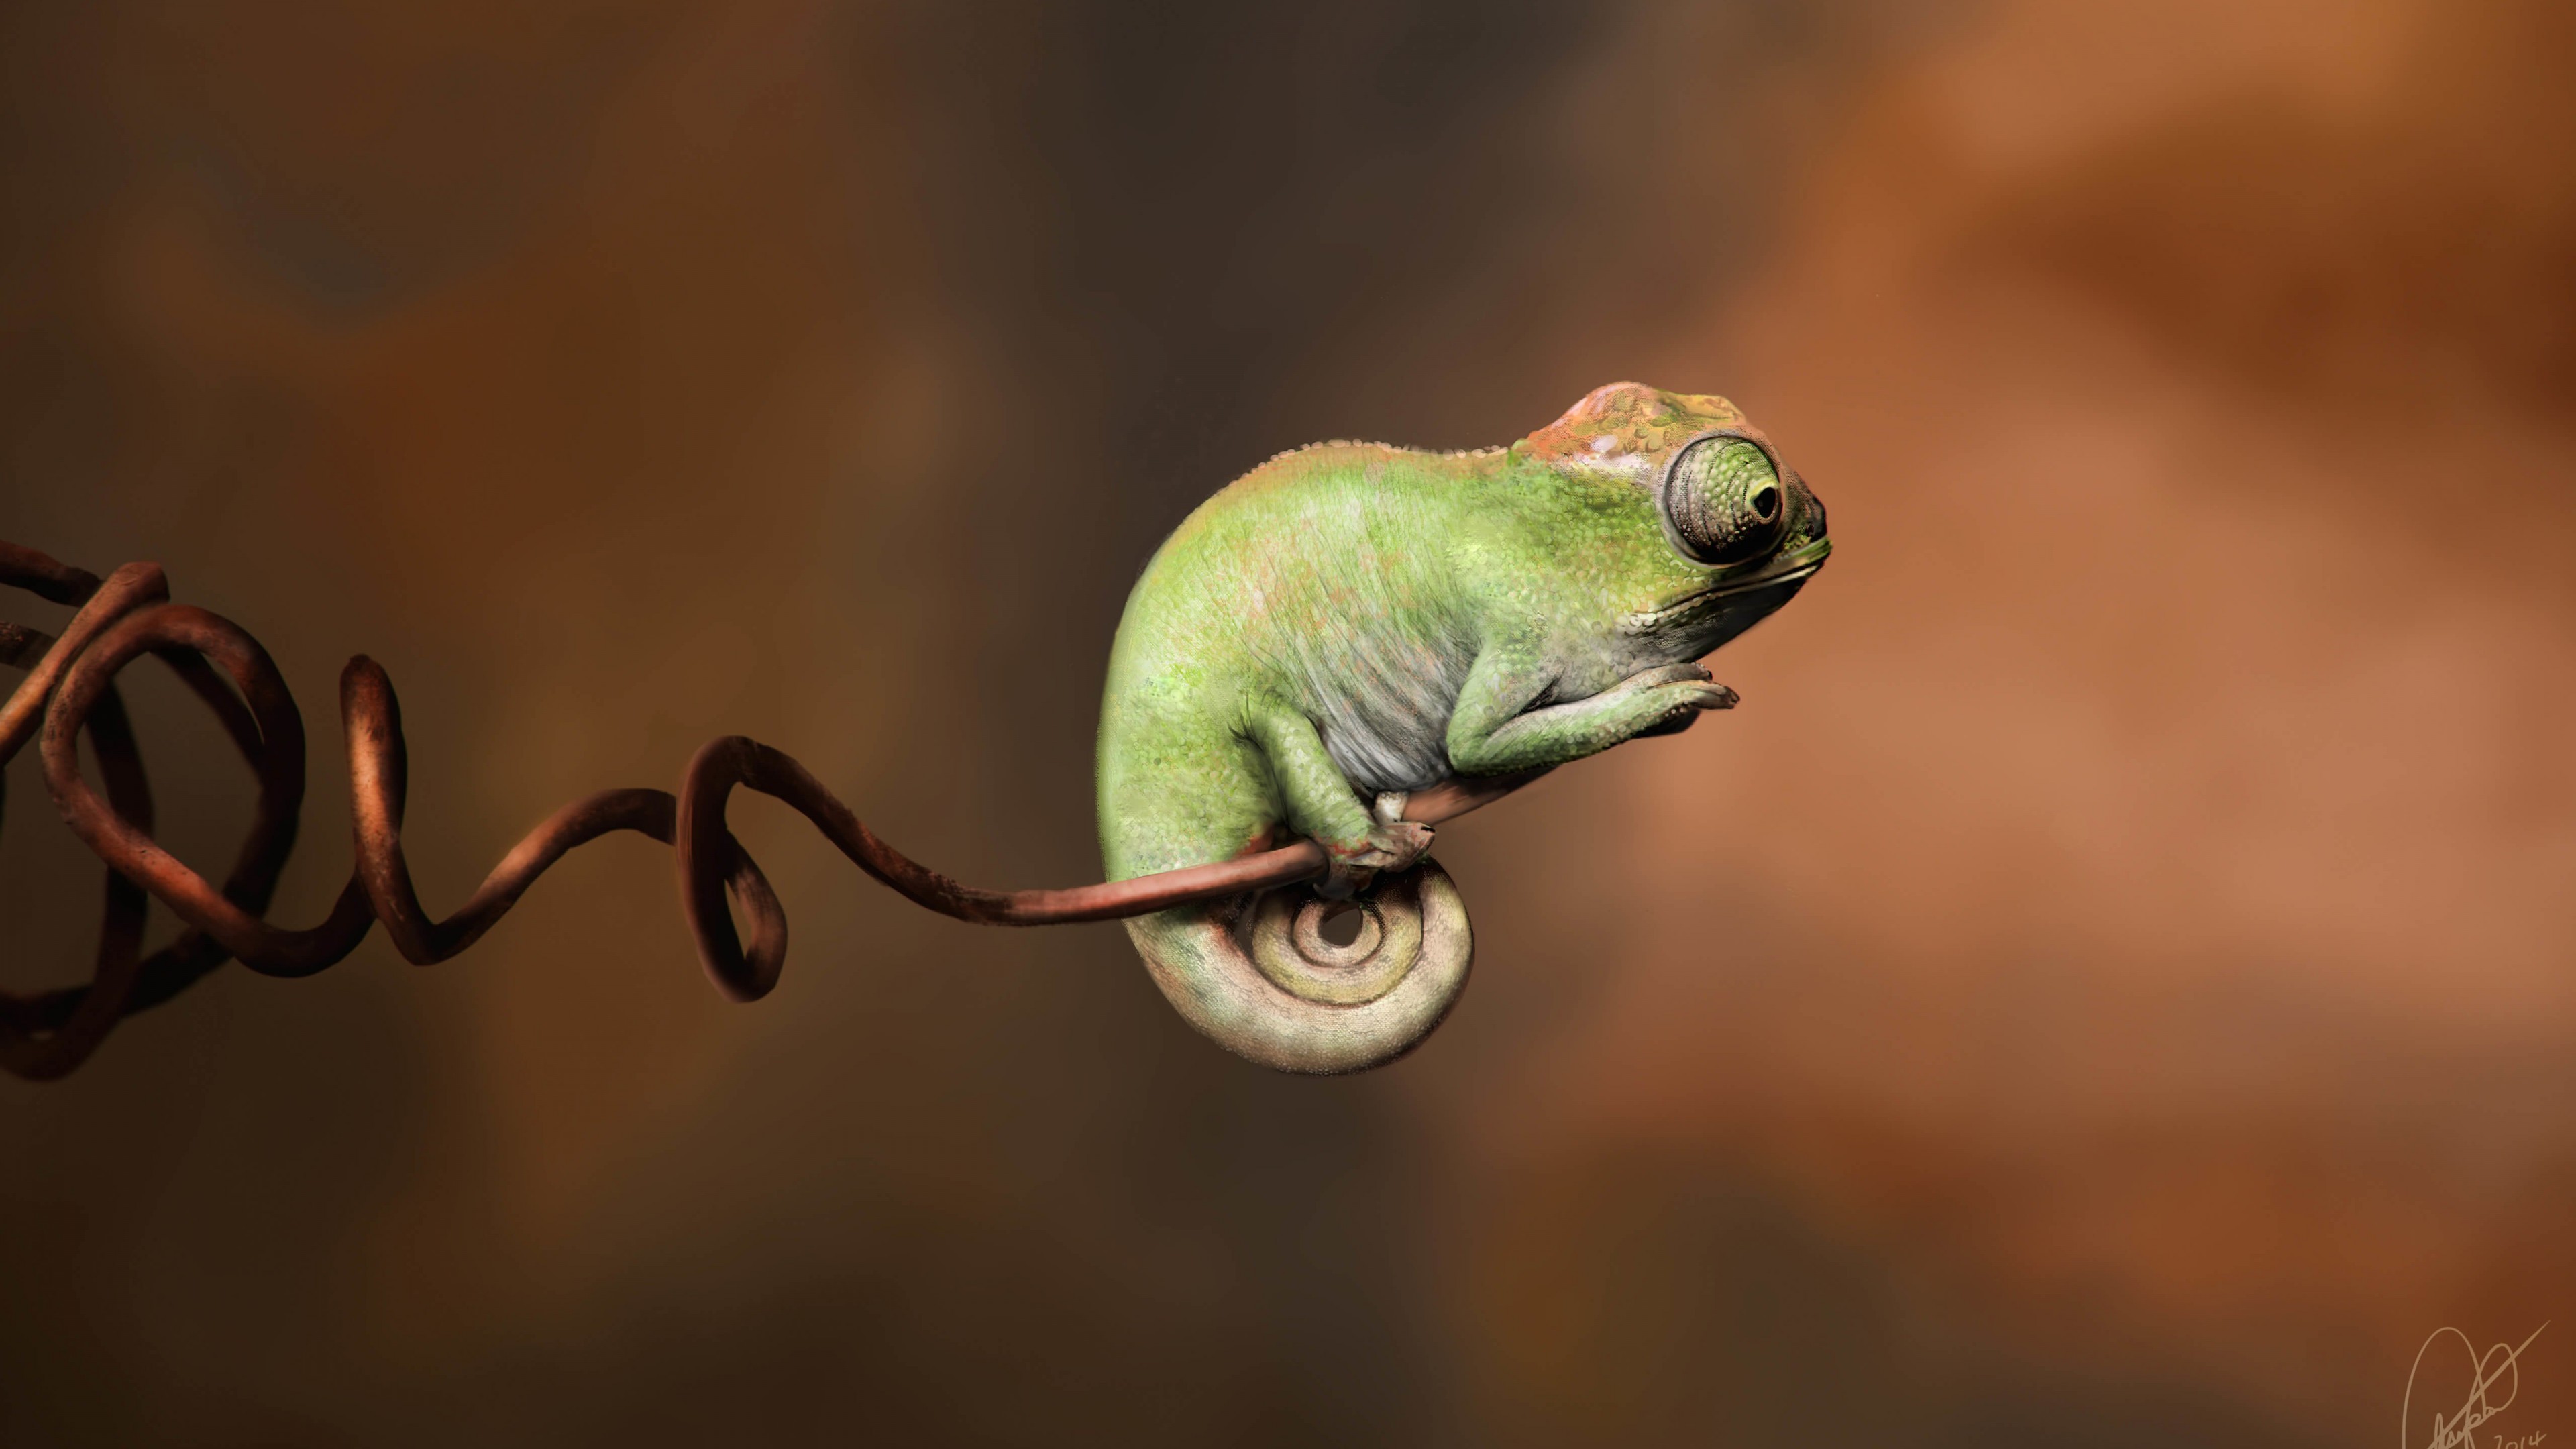 Baby Chameleon Perching On a Twisted Branch Wallpaper for Desktop 4K 3840x2160